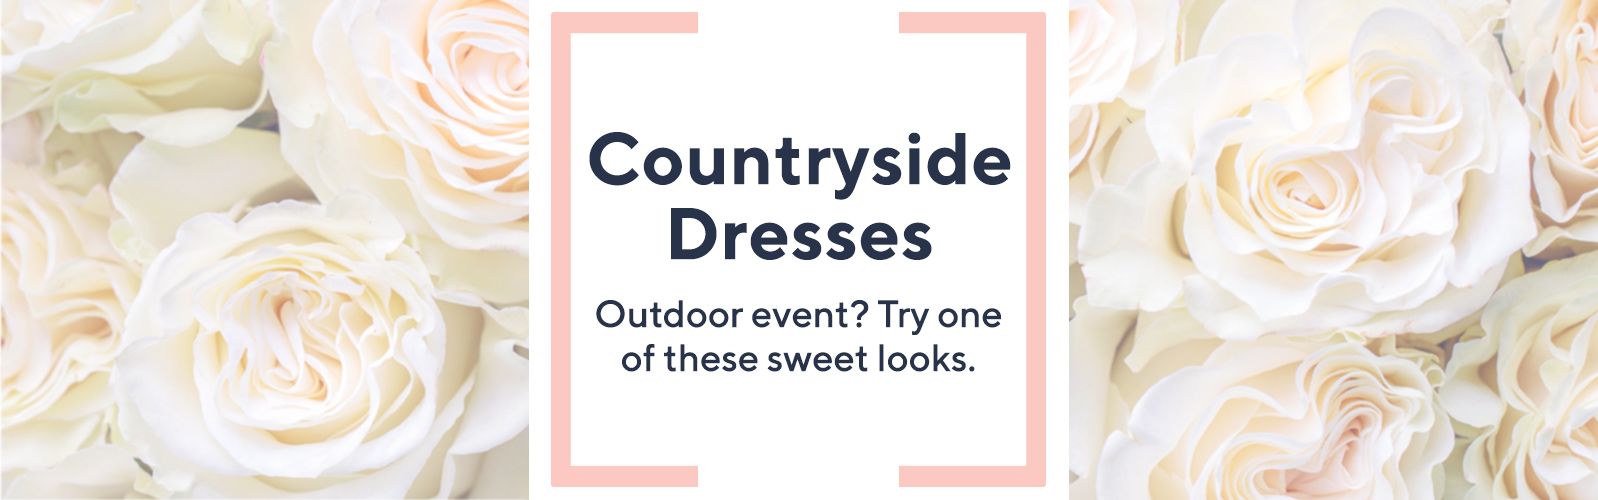 Countryside Dresses.  Outdoor event? Try one of these sweet looks.